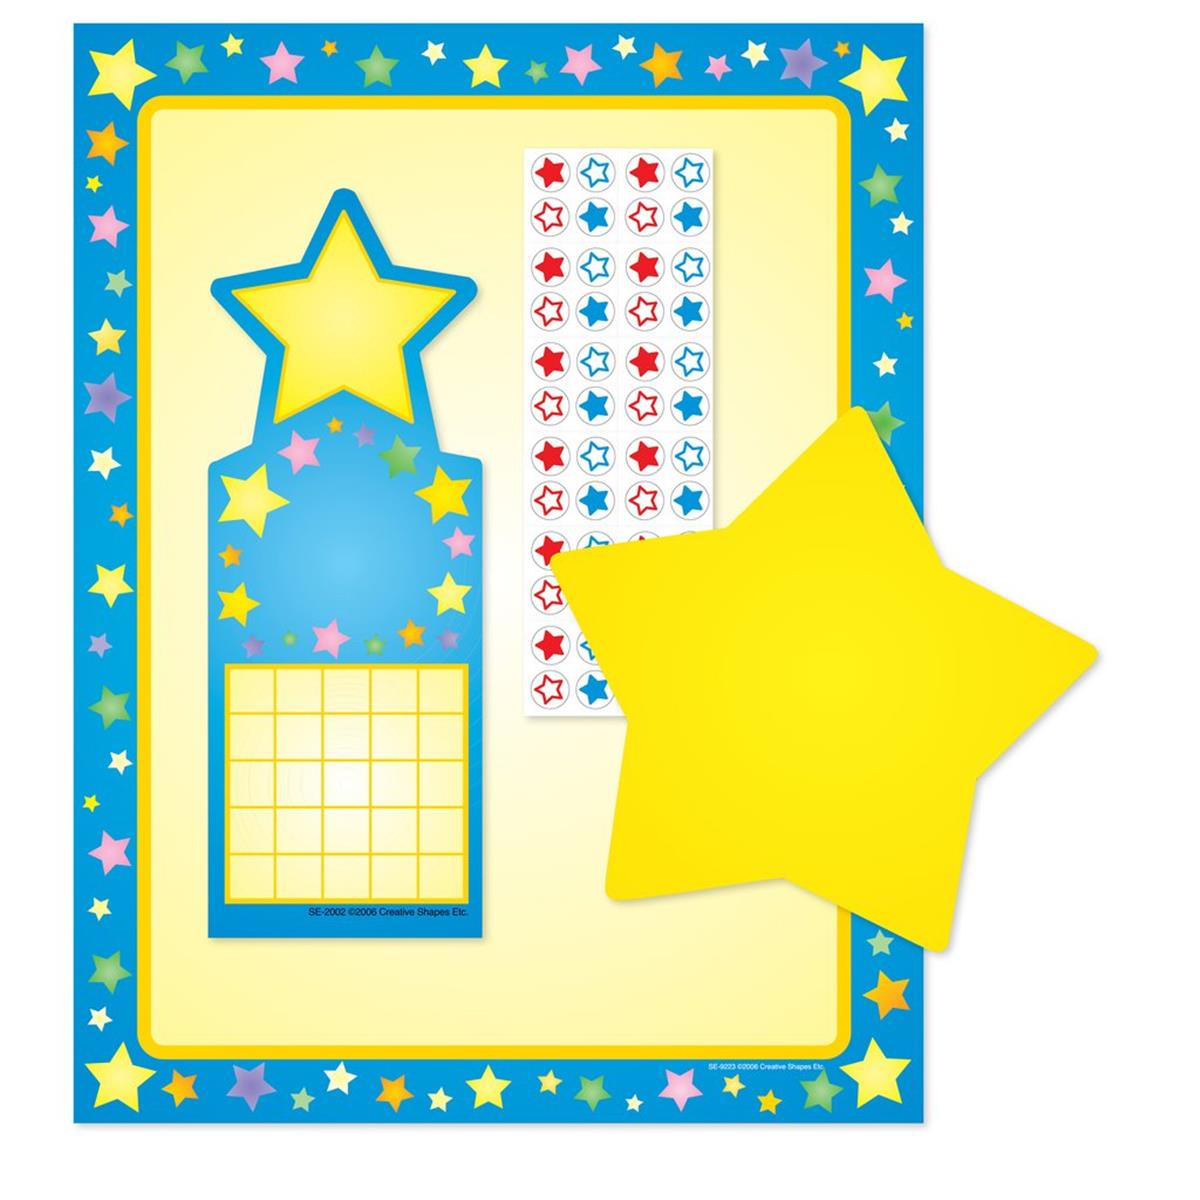 Picture of Creative Shapes Etc SE-7102 11 x 8.5 in. Stationery Set - Multi Stars